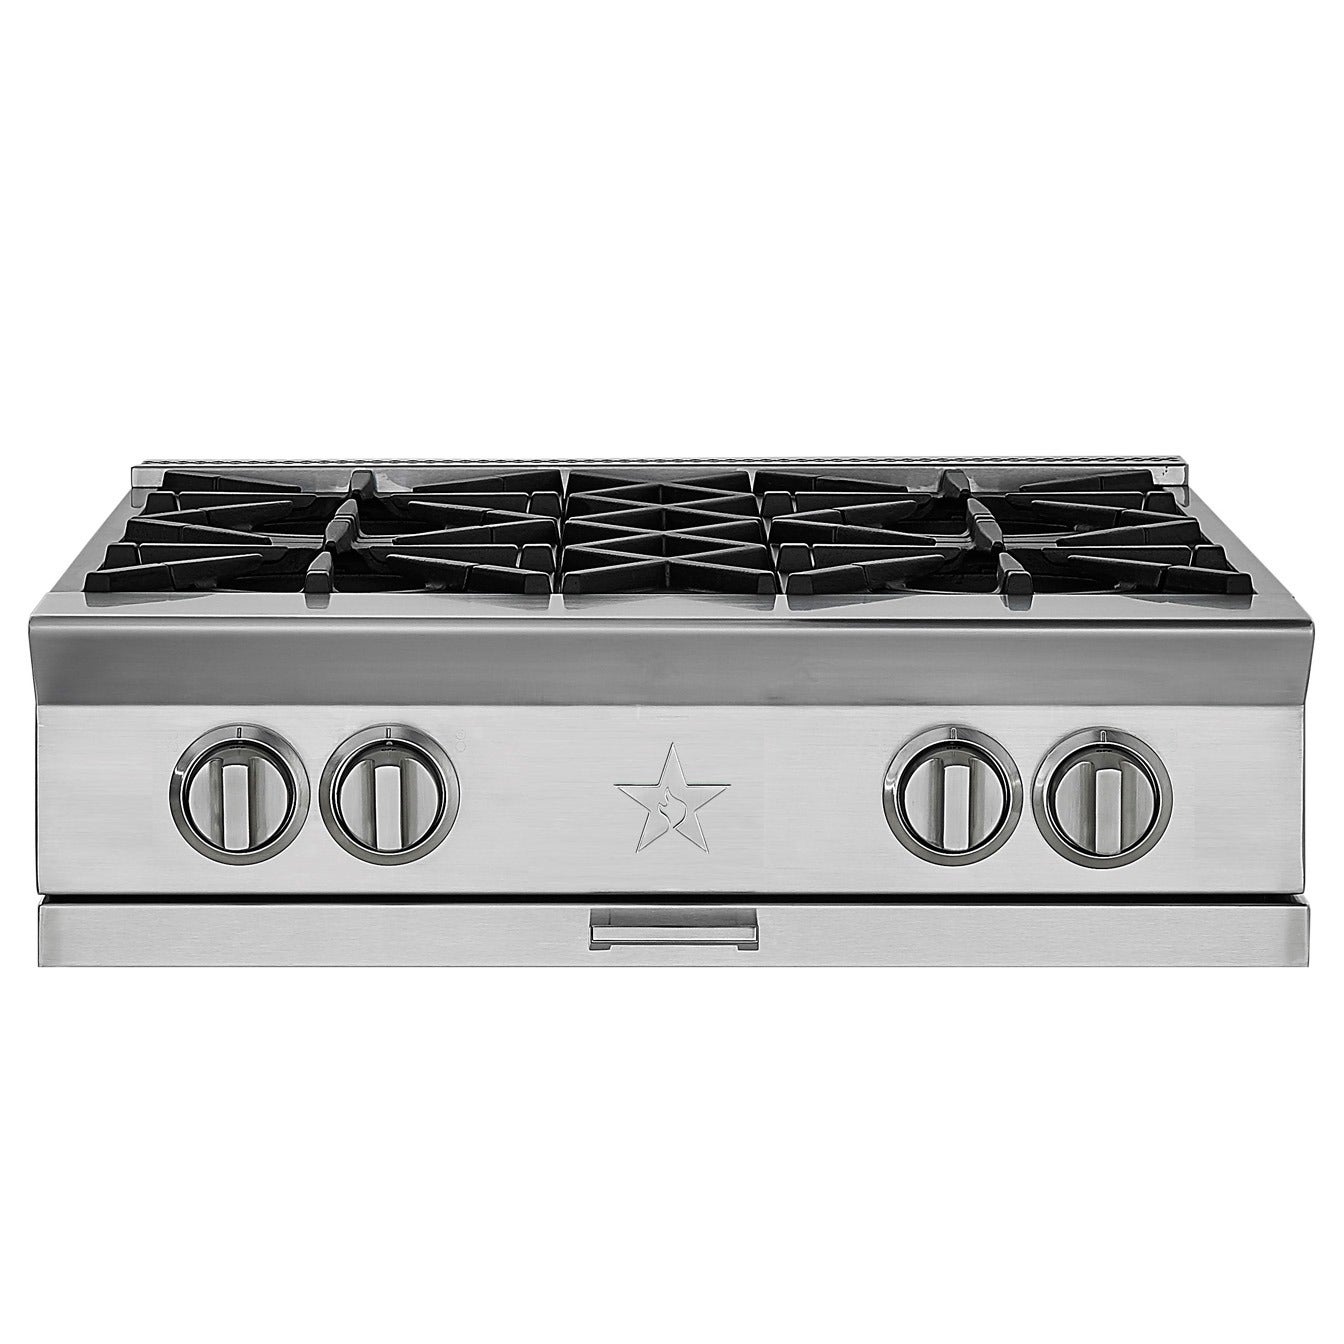 Refined Design And  Easier To Clean Cooktop